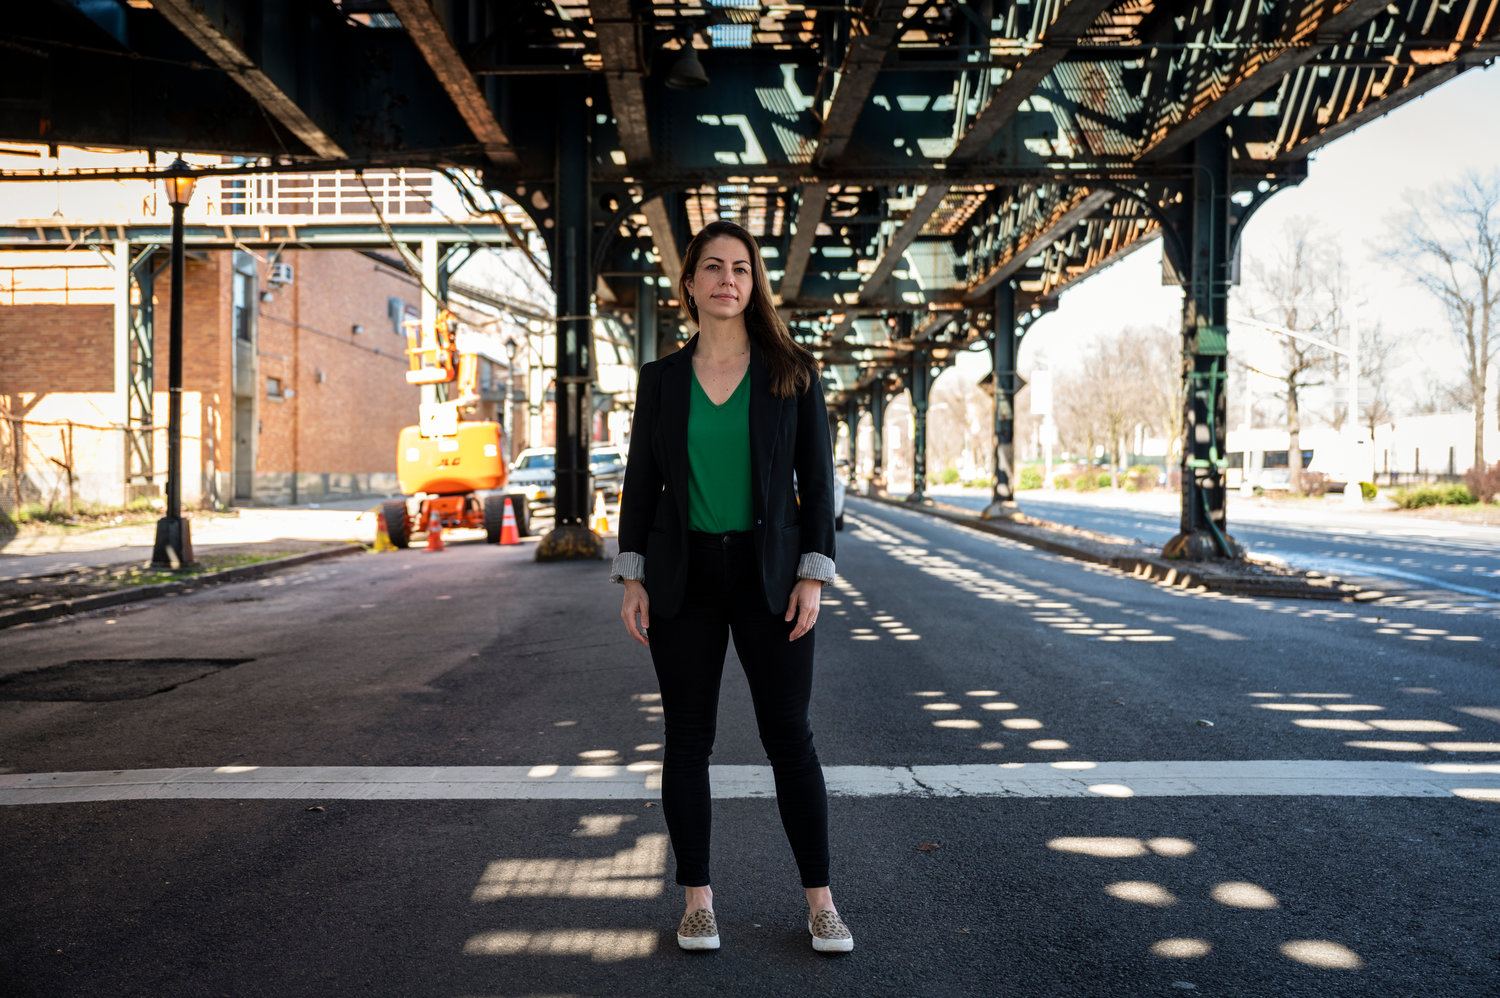 After sitting out the March city council special election, social worker Abigail Martin says she has an energized and well-funded campaign. Martin is one of six candidates competing in a June Democratic primary to represent this corner of the Bronx — a seat currently held by Eric Dinowitz.